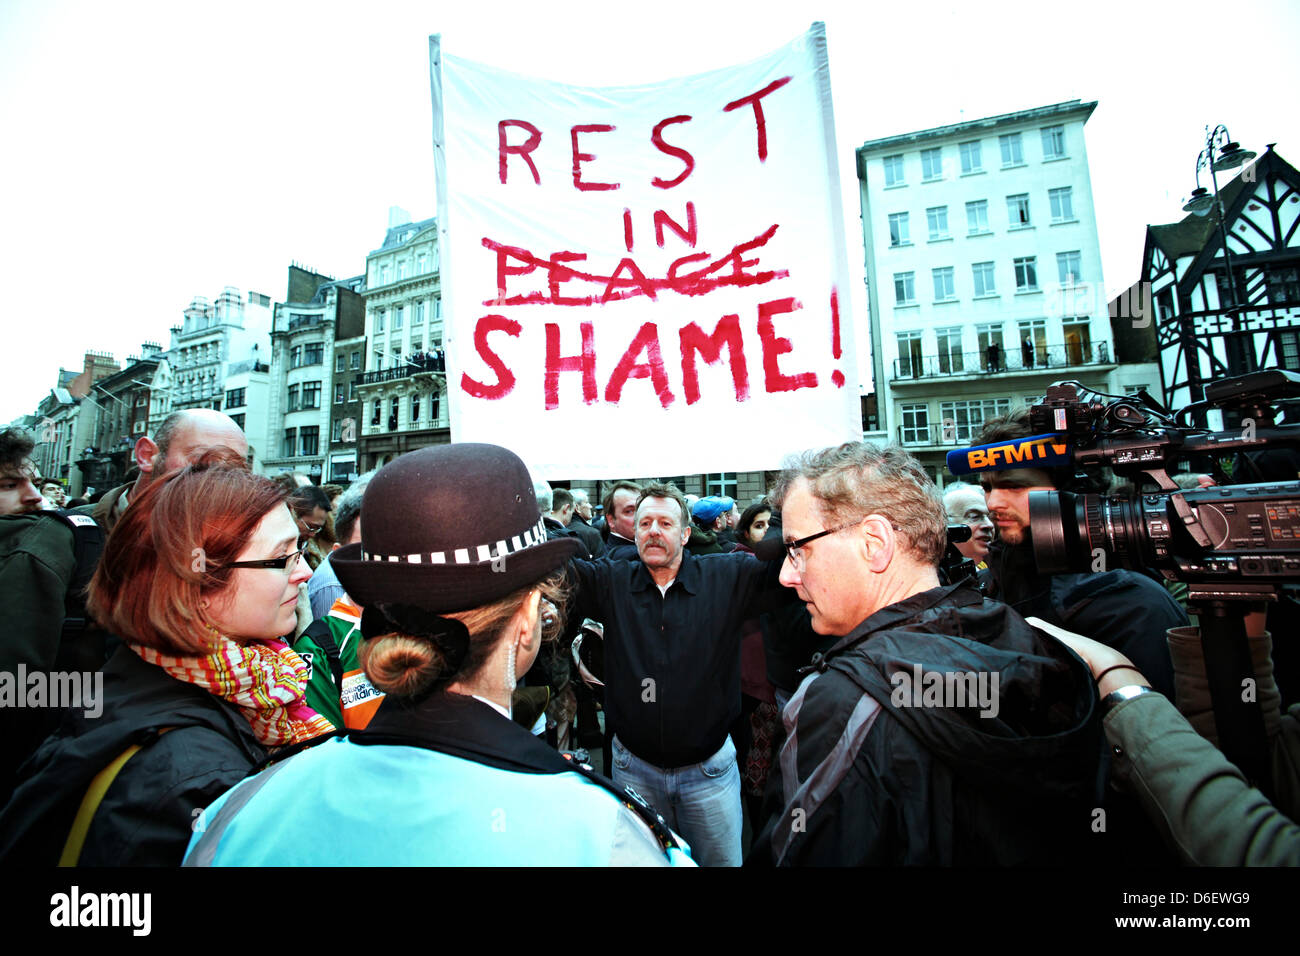 London, UK. 17th April 2013. Crowds gather for Baroness Thatcher's funeral. Credit: Ruaridh Papworth/Alamy Live News Stock Photo